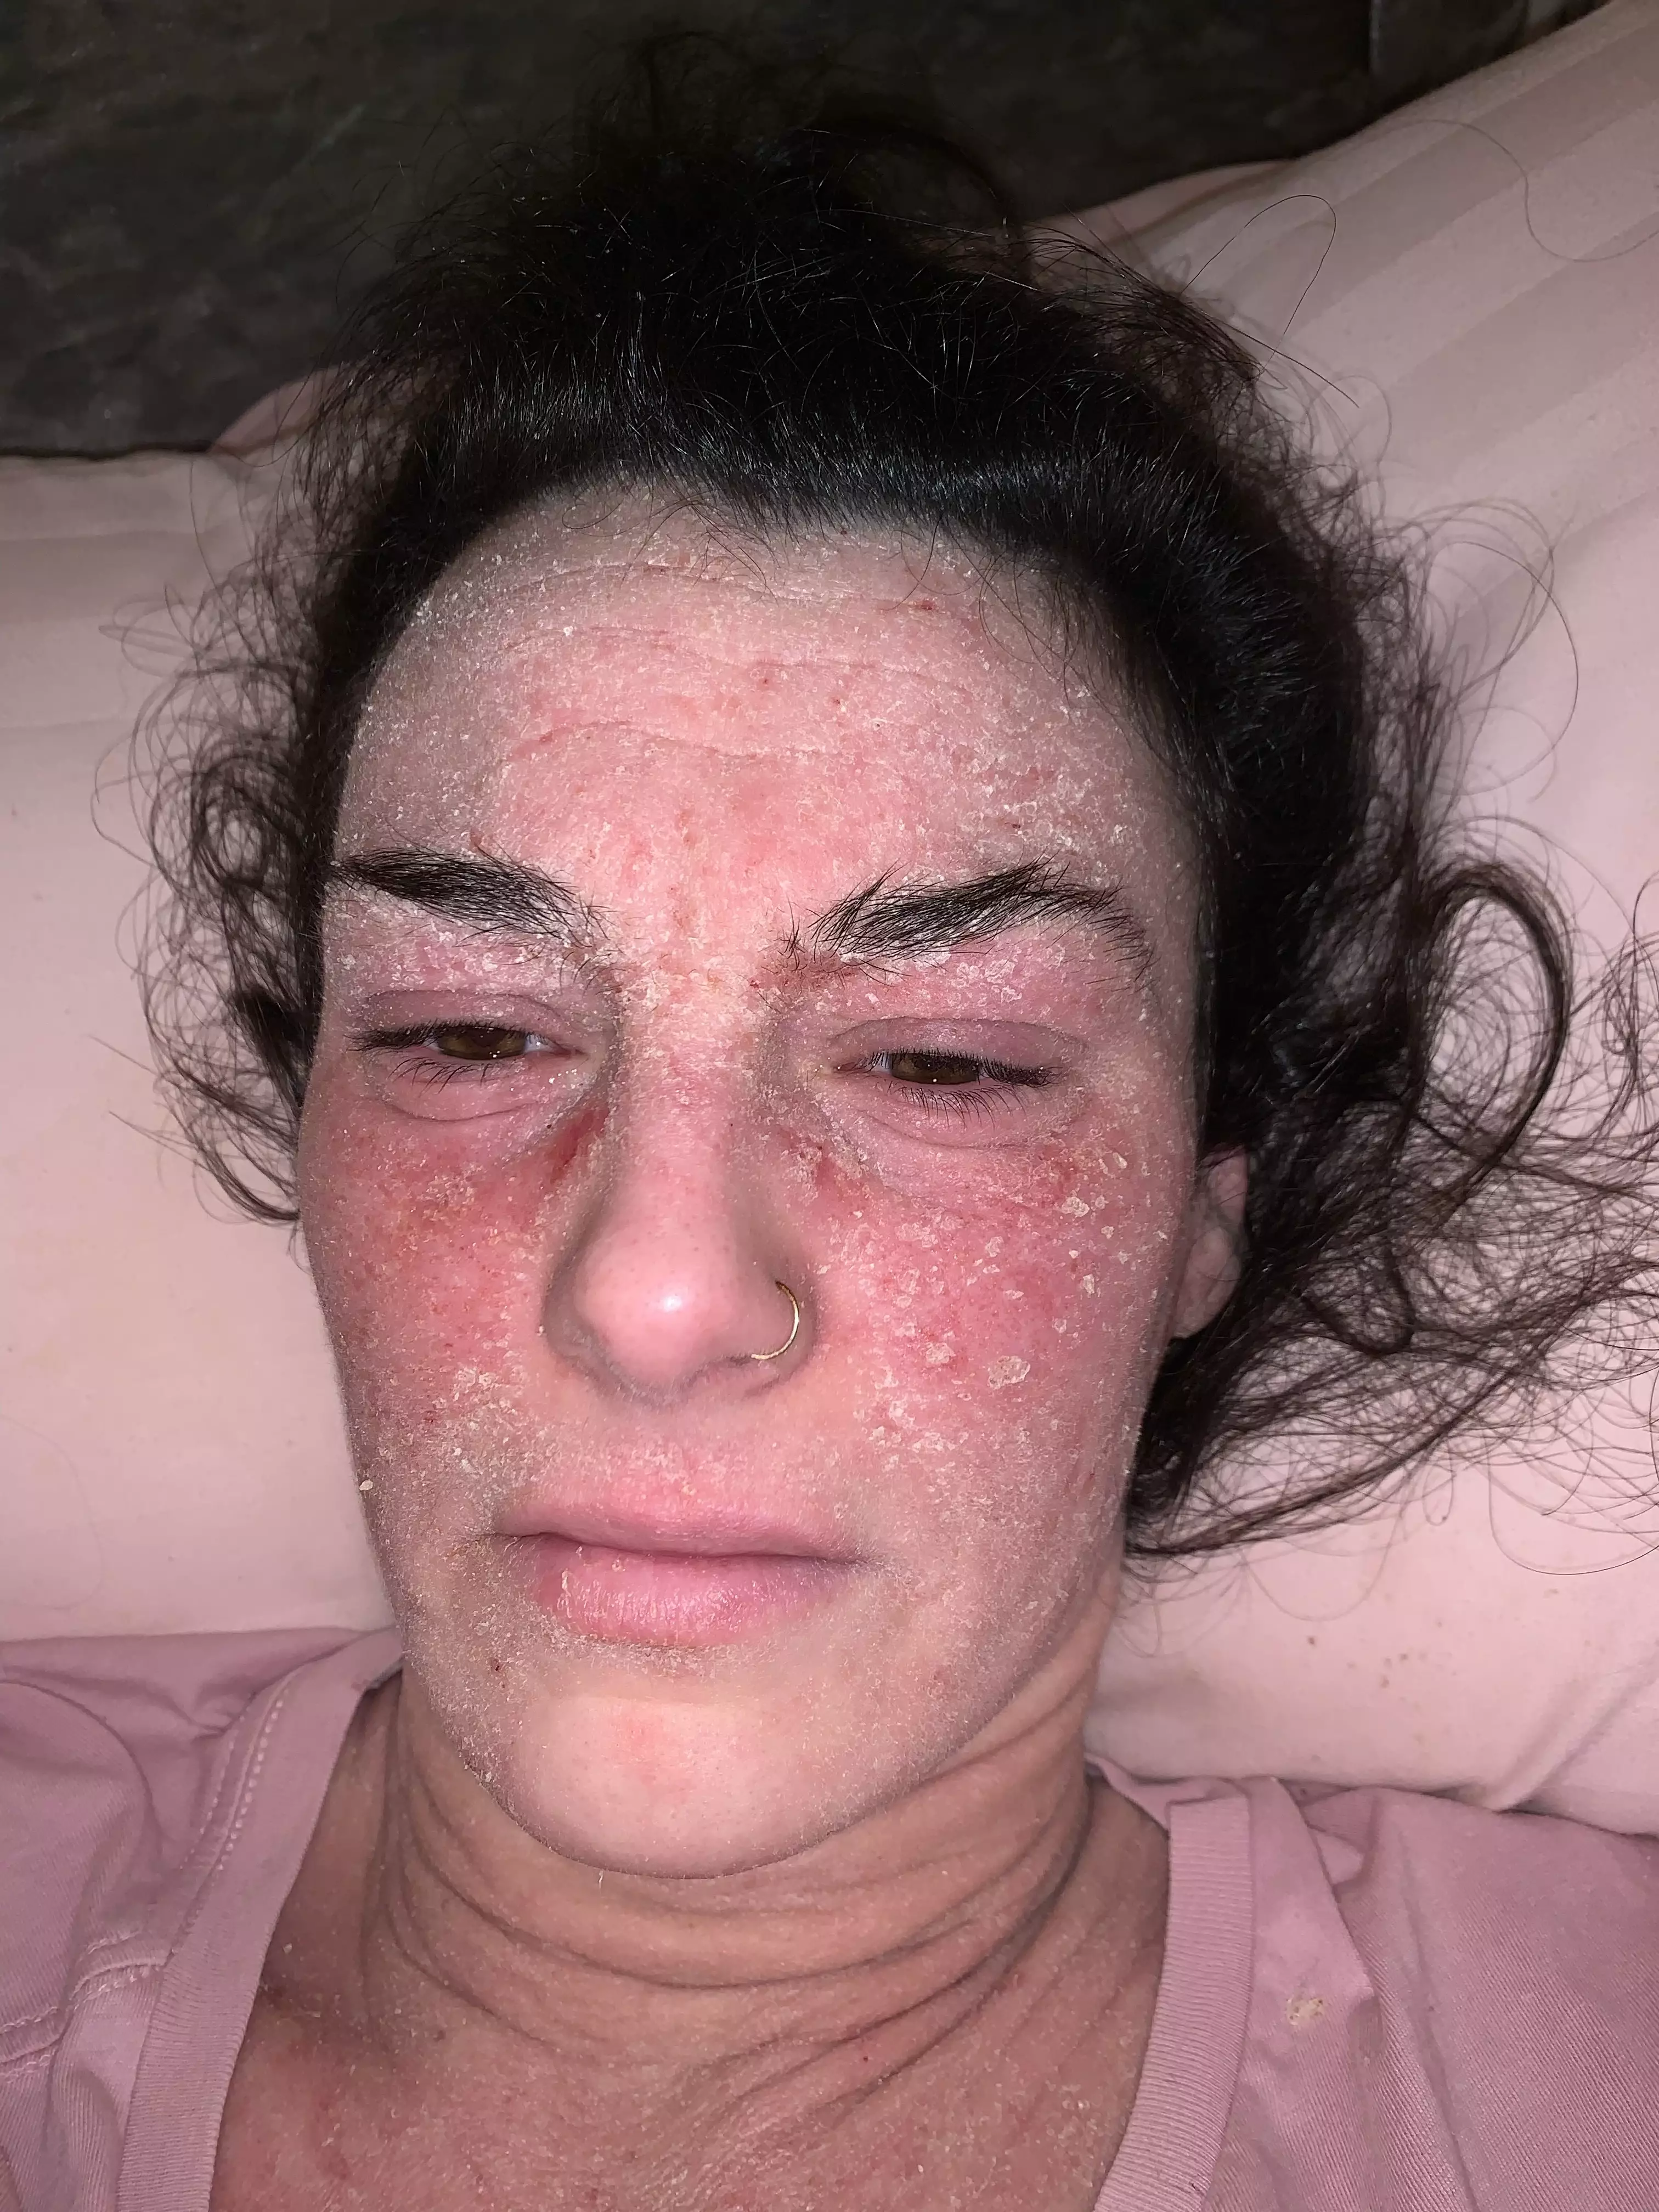 When Stephanie was made redundant in 2018, her eczema flared up worse than ever (